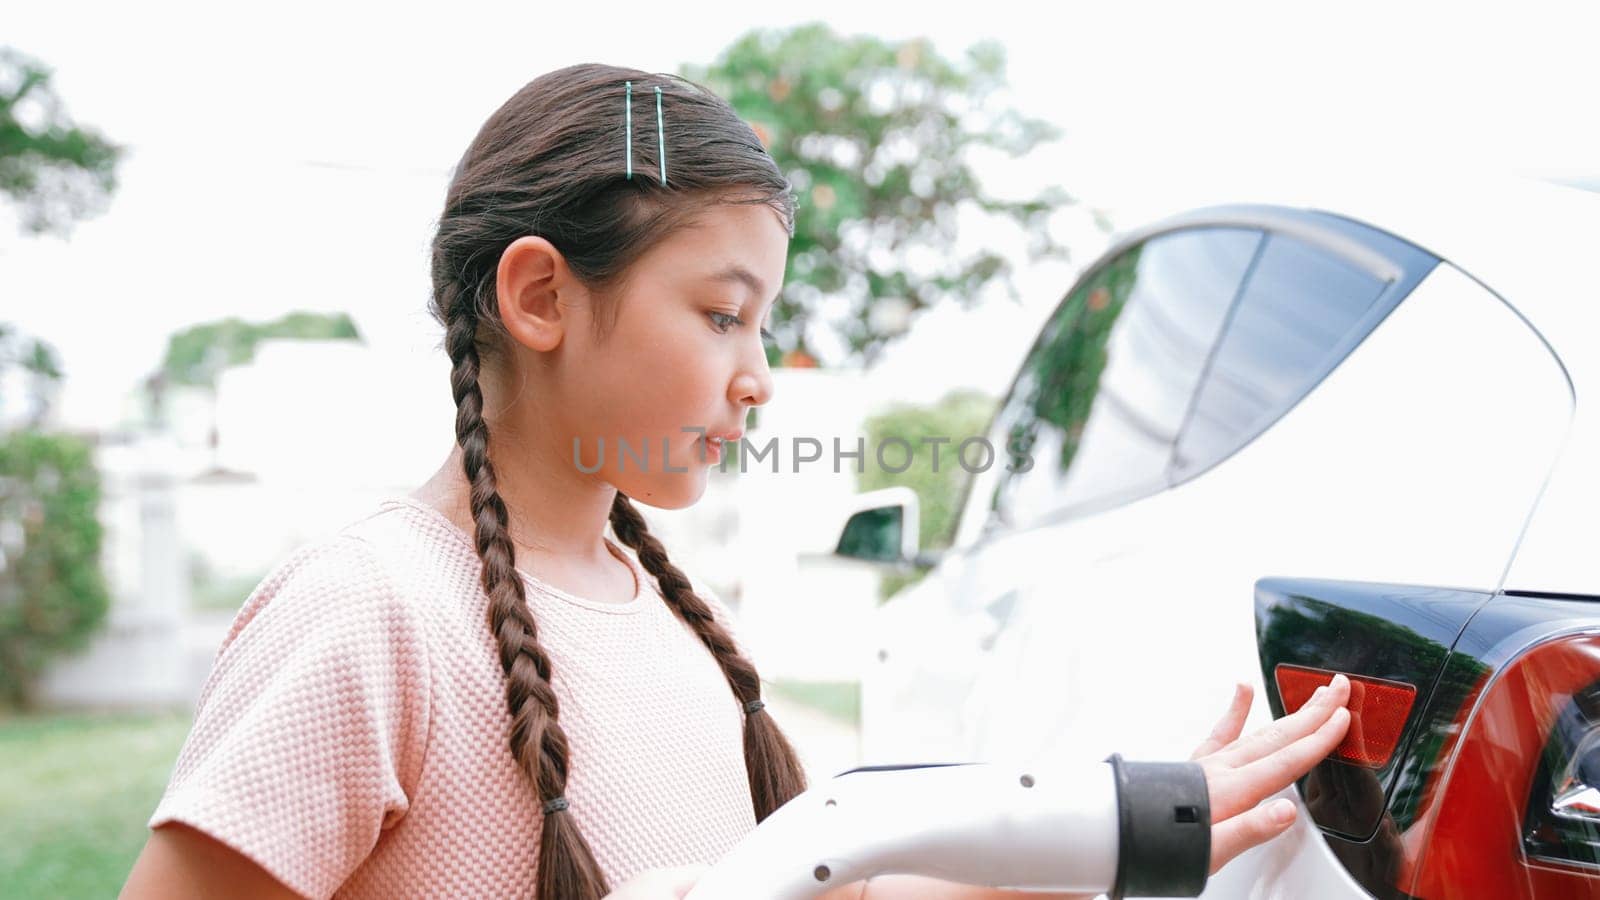 Happy little young girl learn about eco-friendly and energy sustainability as she recharge electric vehicle from home EV charging station. EV car and sustainable future generation concept. Synchronos